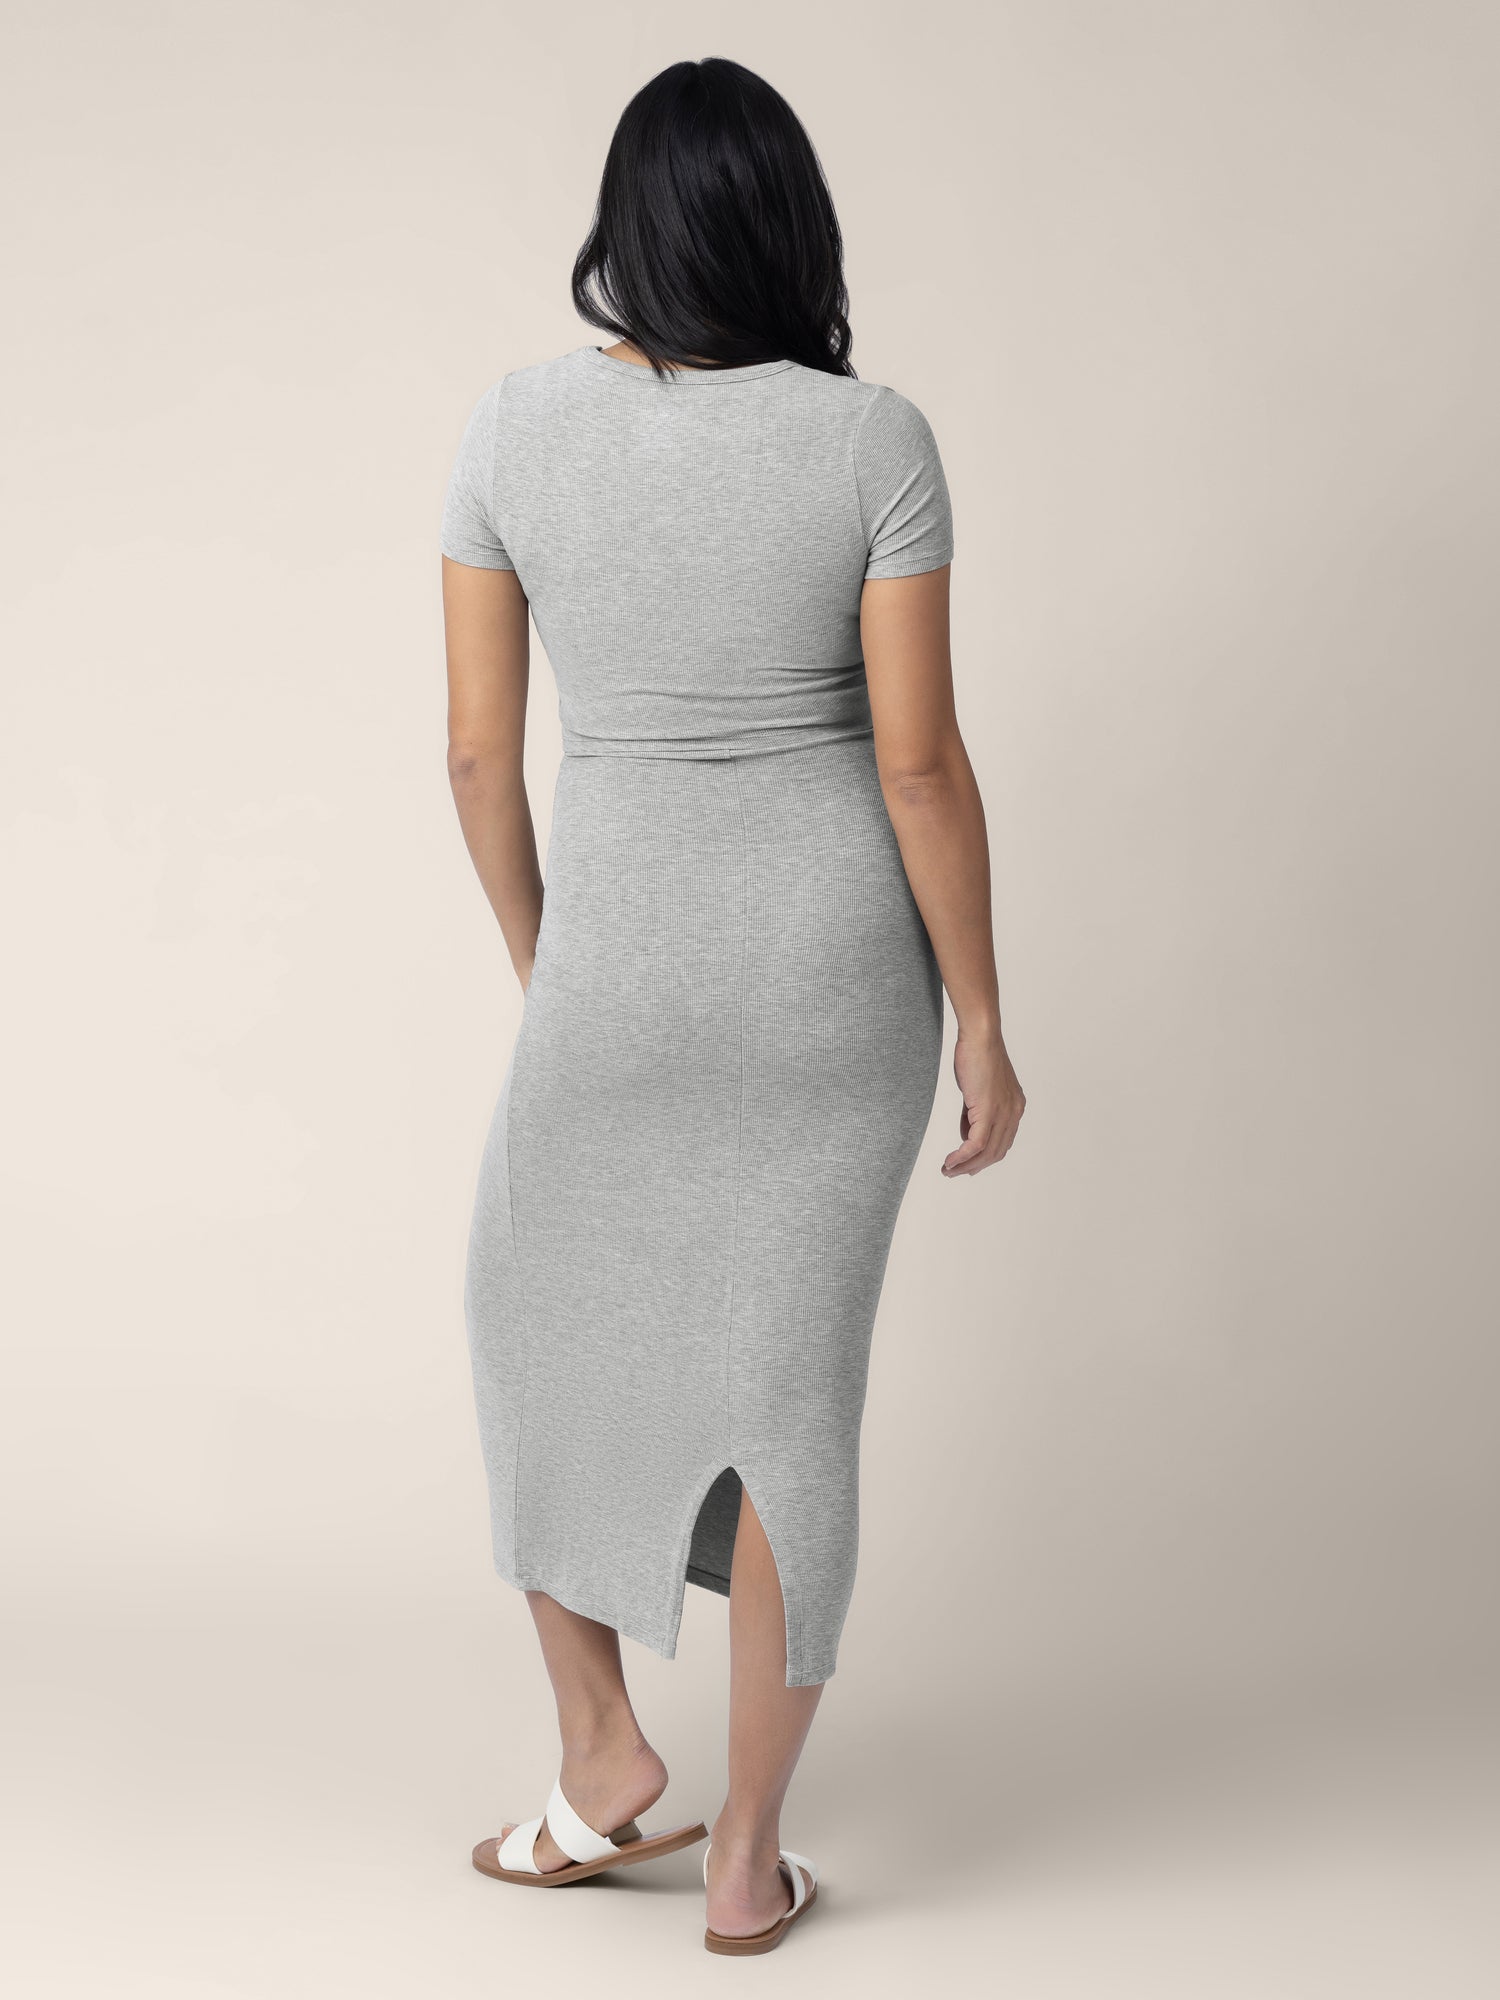 Model wearing the Olivia Ribbed Bamboo 2-in-1 Maternity & Nursing Dress in Grey Heather